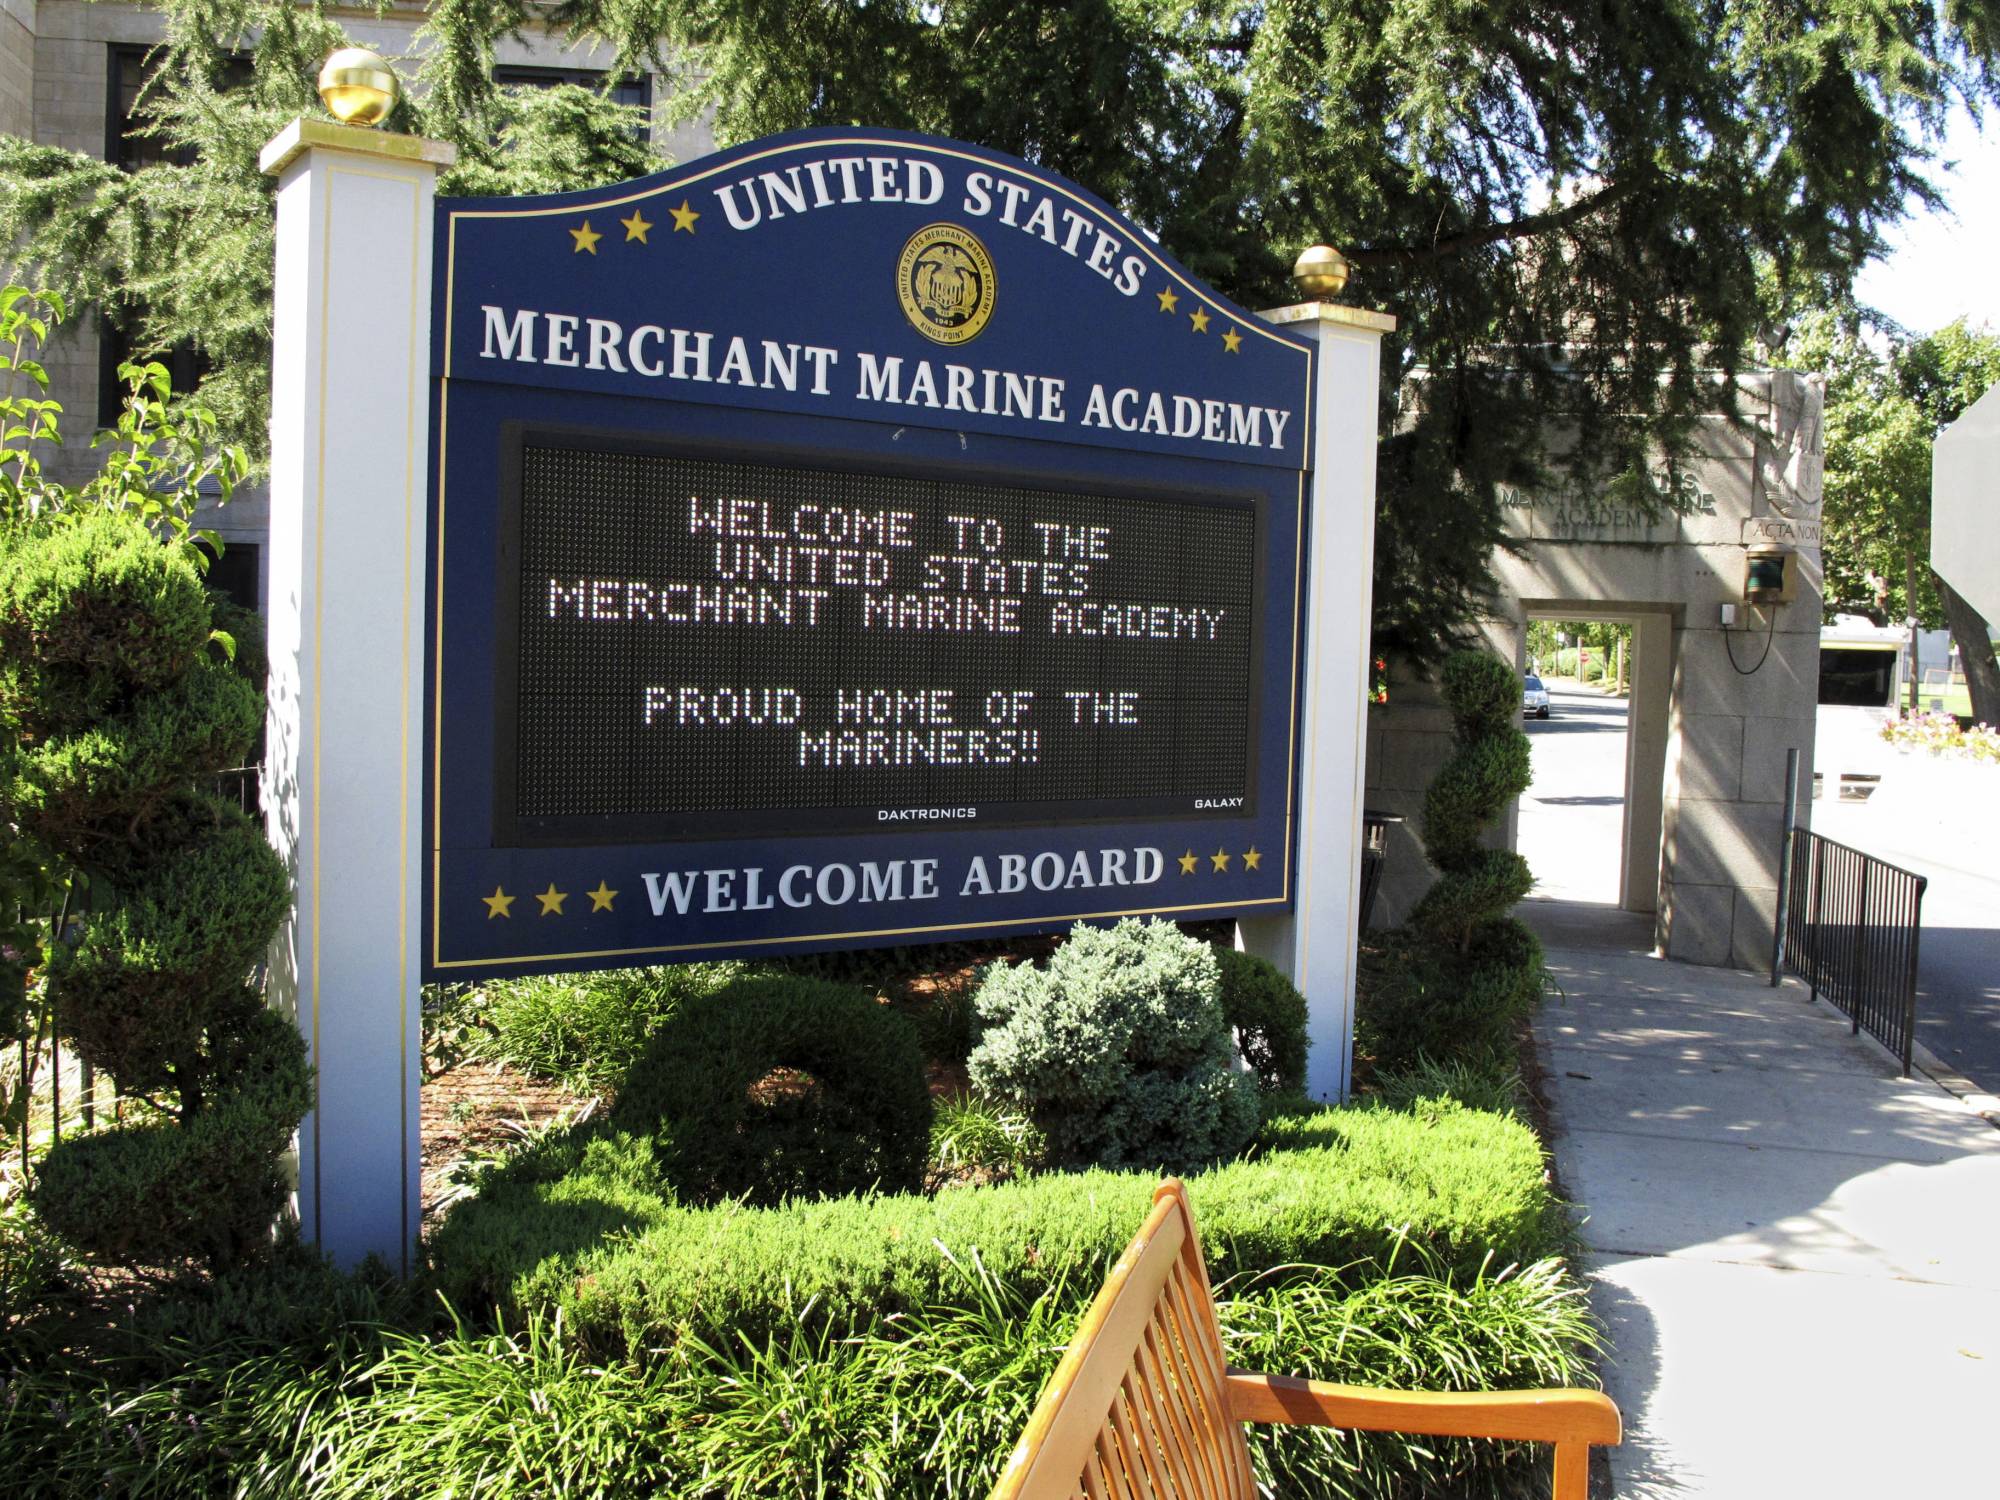 FILE - In this Sept. 13, 2016, file photo, a sign welcomes visitors at the entrance to the U.S. Merchant Marine Academy in Kings Point, N.Y. Seven suspended men's soccer players at the U.S. Merchant Marine Academy will face campus disciplinary hearings over allegations of sexual misconduct, coercion and hazing, according to a federal lawyer. Newsday reported on July 22, 2017, that Assistant U.S. Attorney James H. Knapp said the students were sexually abusive toward a freshman player on the team bus in September 2-17, and they squirted water or urine plus covered several people with food, (AP Photo/Frank Eltman, File)